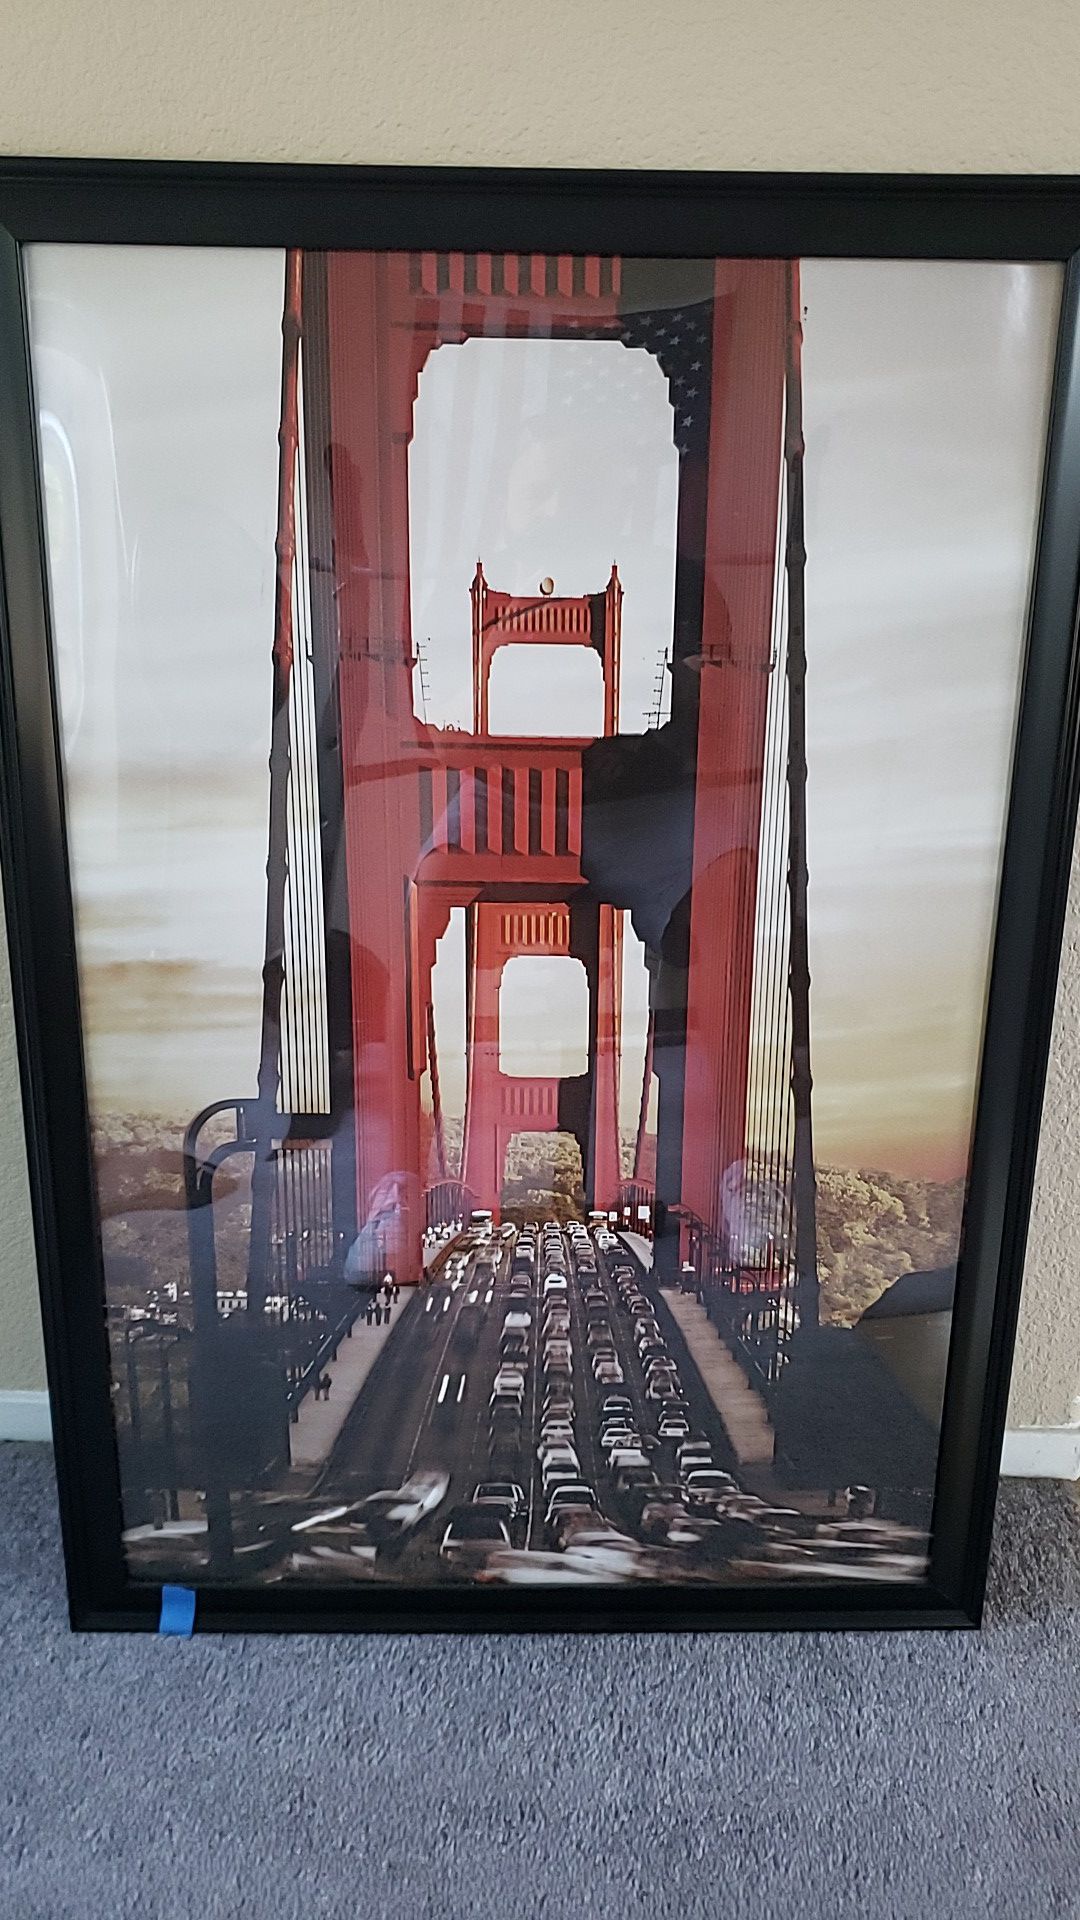 Golden gates Bridge picture with frame